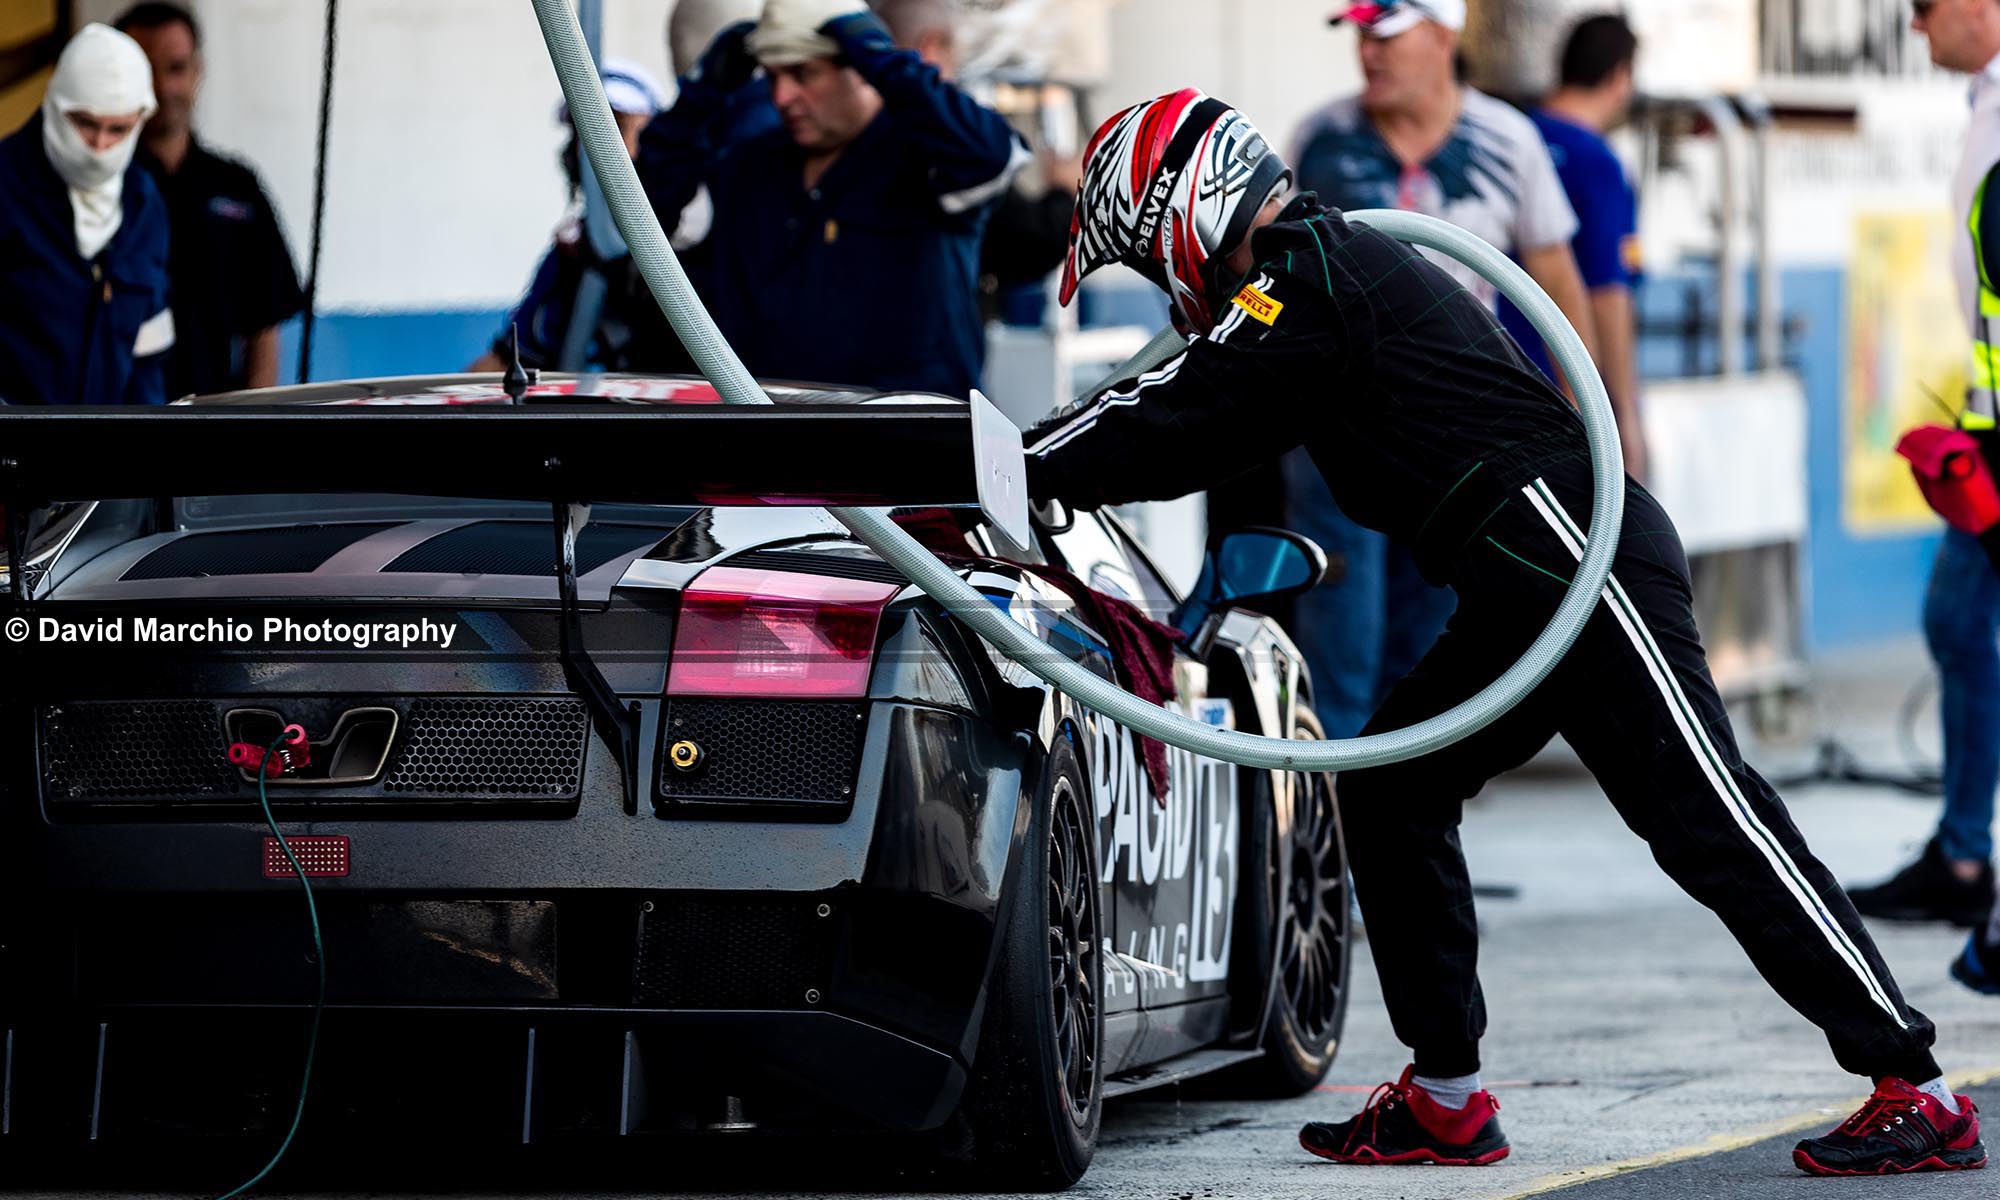 The Lamborghini of Stradale motorsport in for a pitstop. The Gallardo finished second in second position in the Campos 600